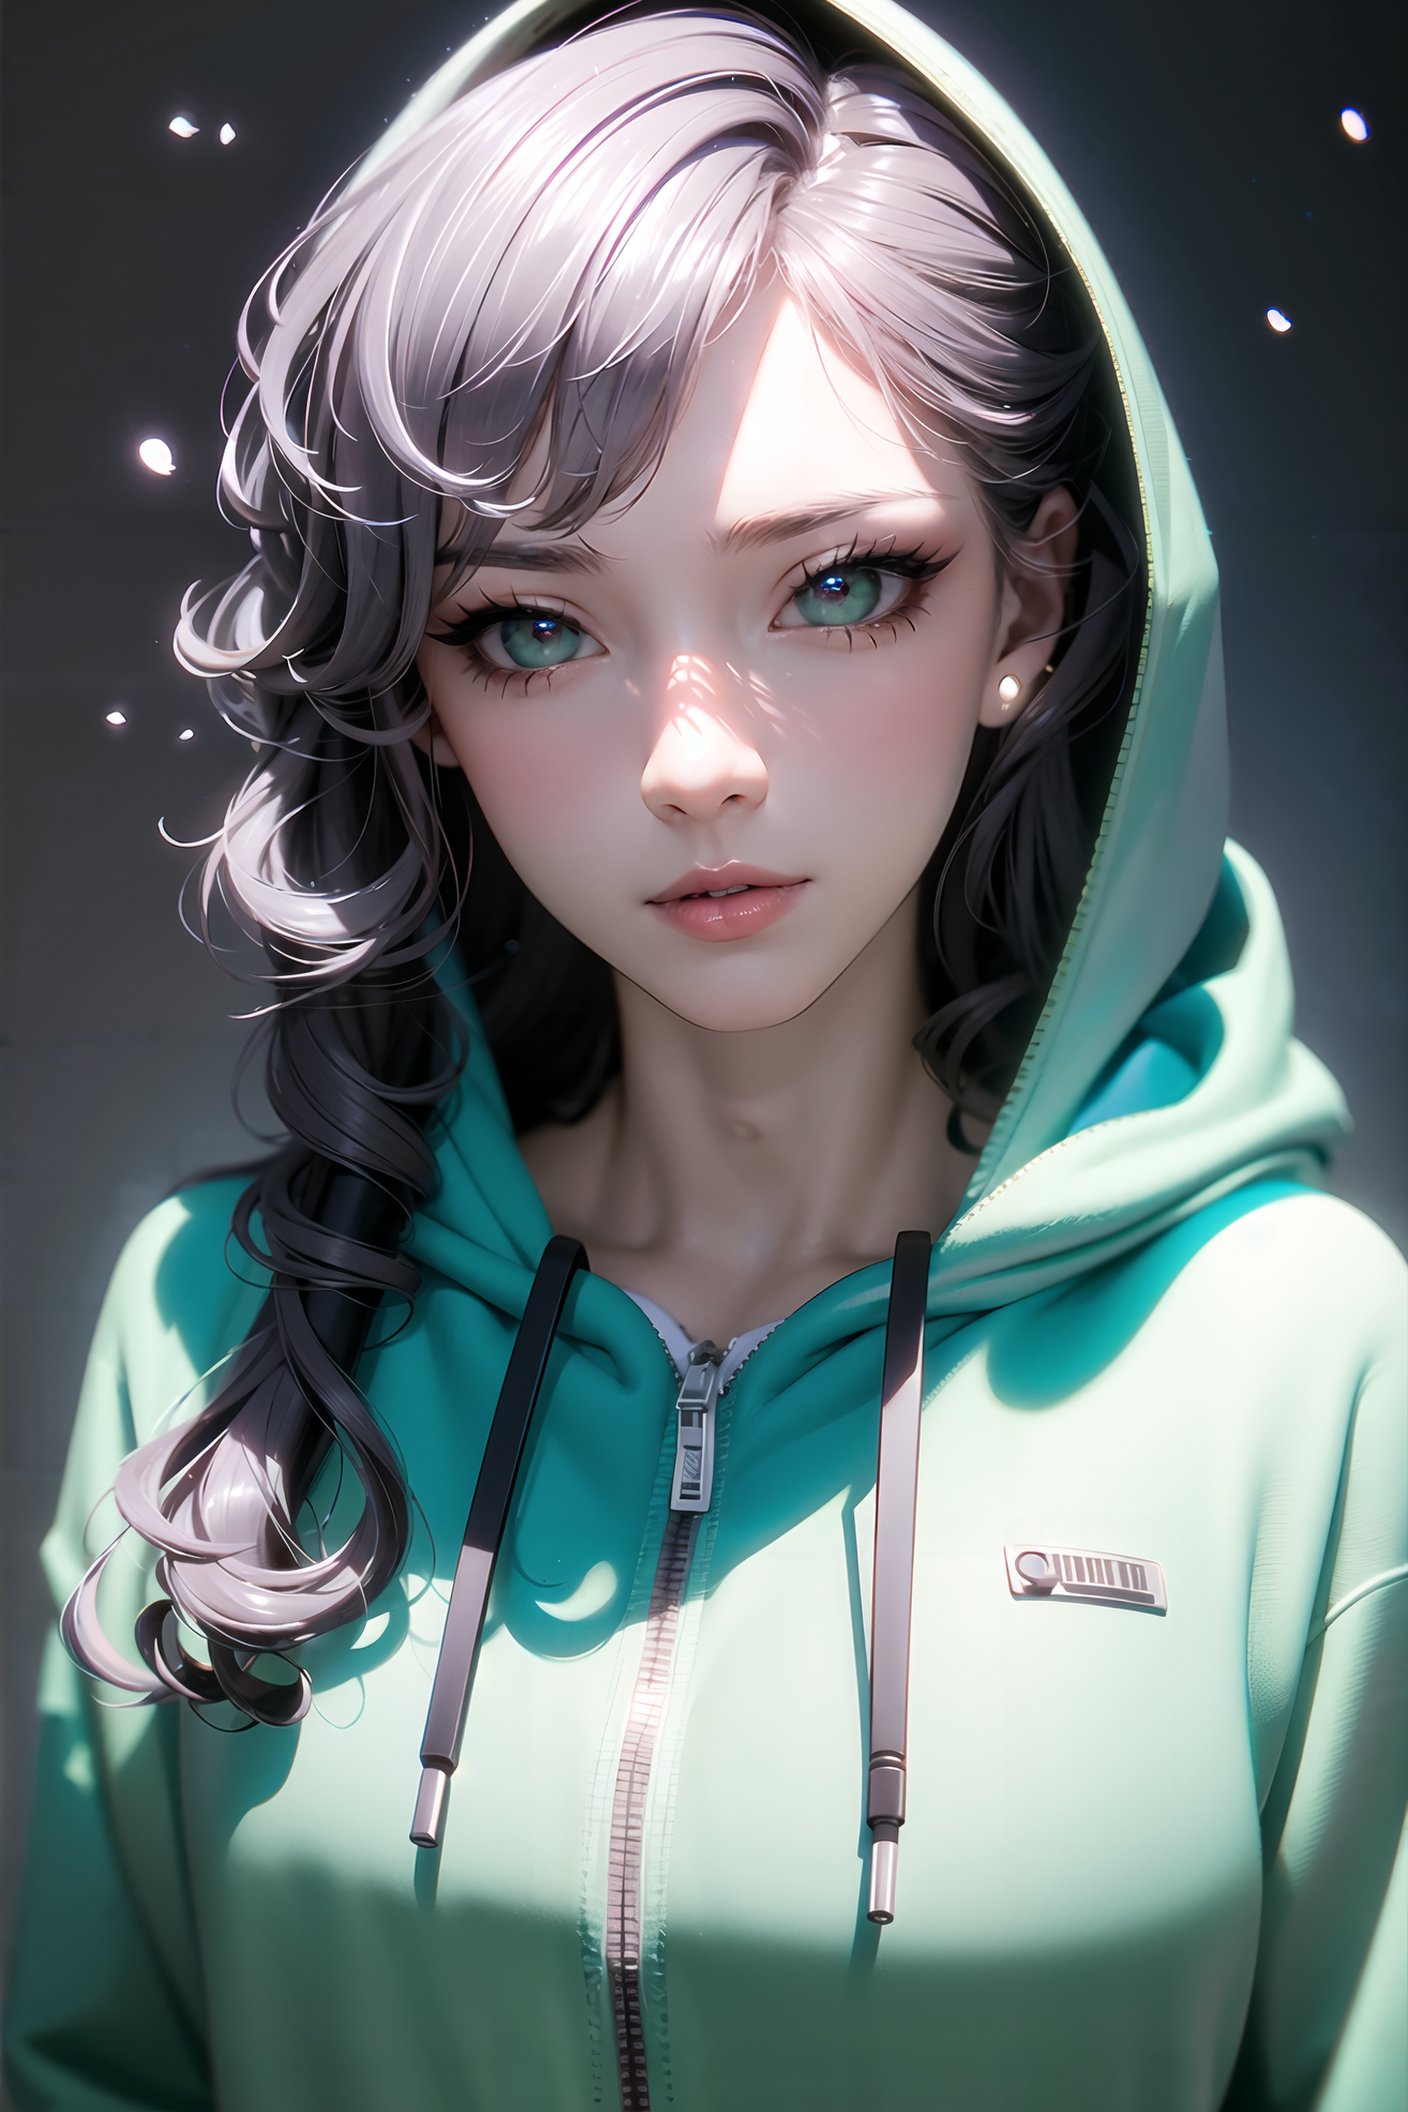 Beautiful Ai Drawn Girls On Twitter Aiart Aiartcommunity Aiartwork Aiイラスト